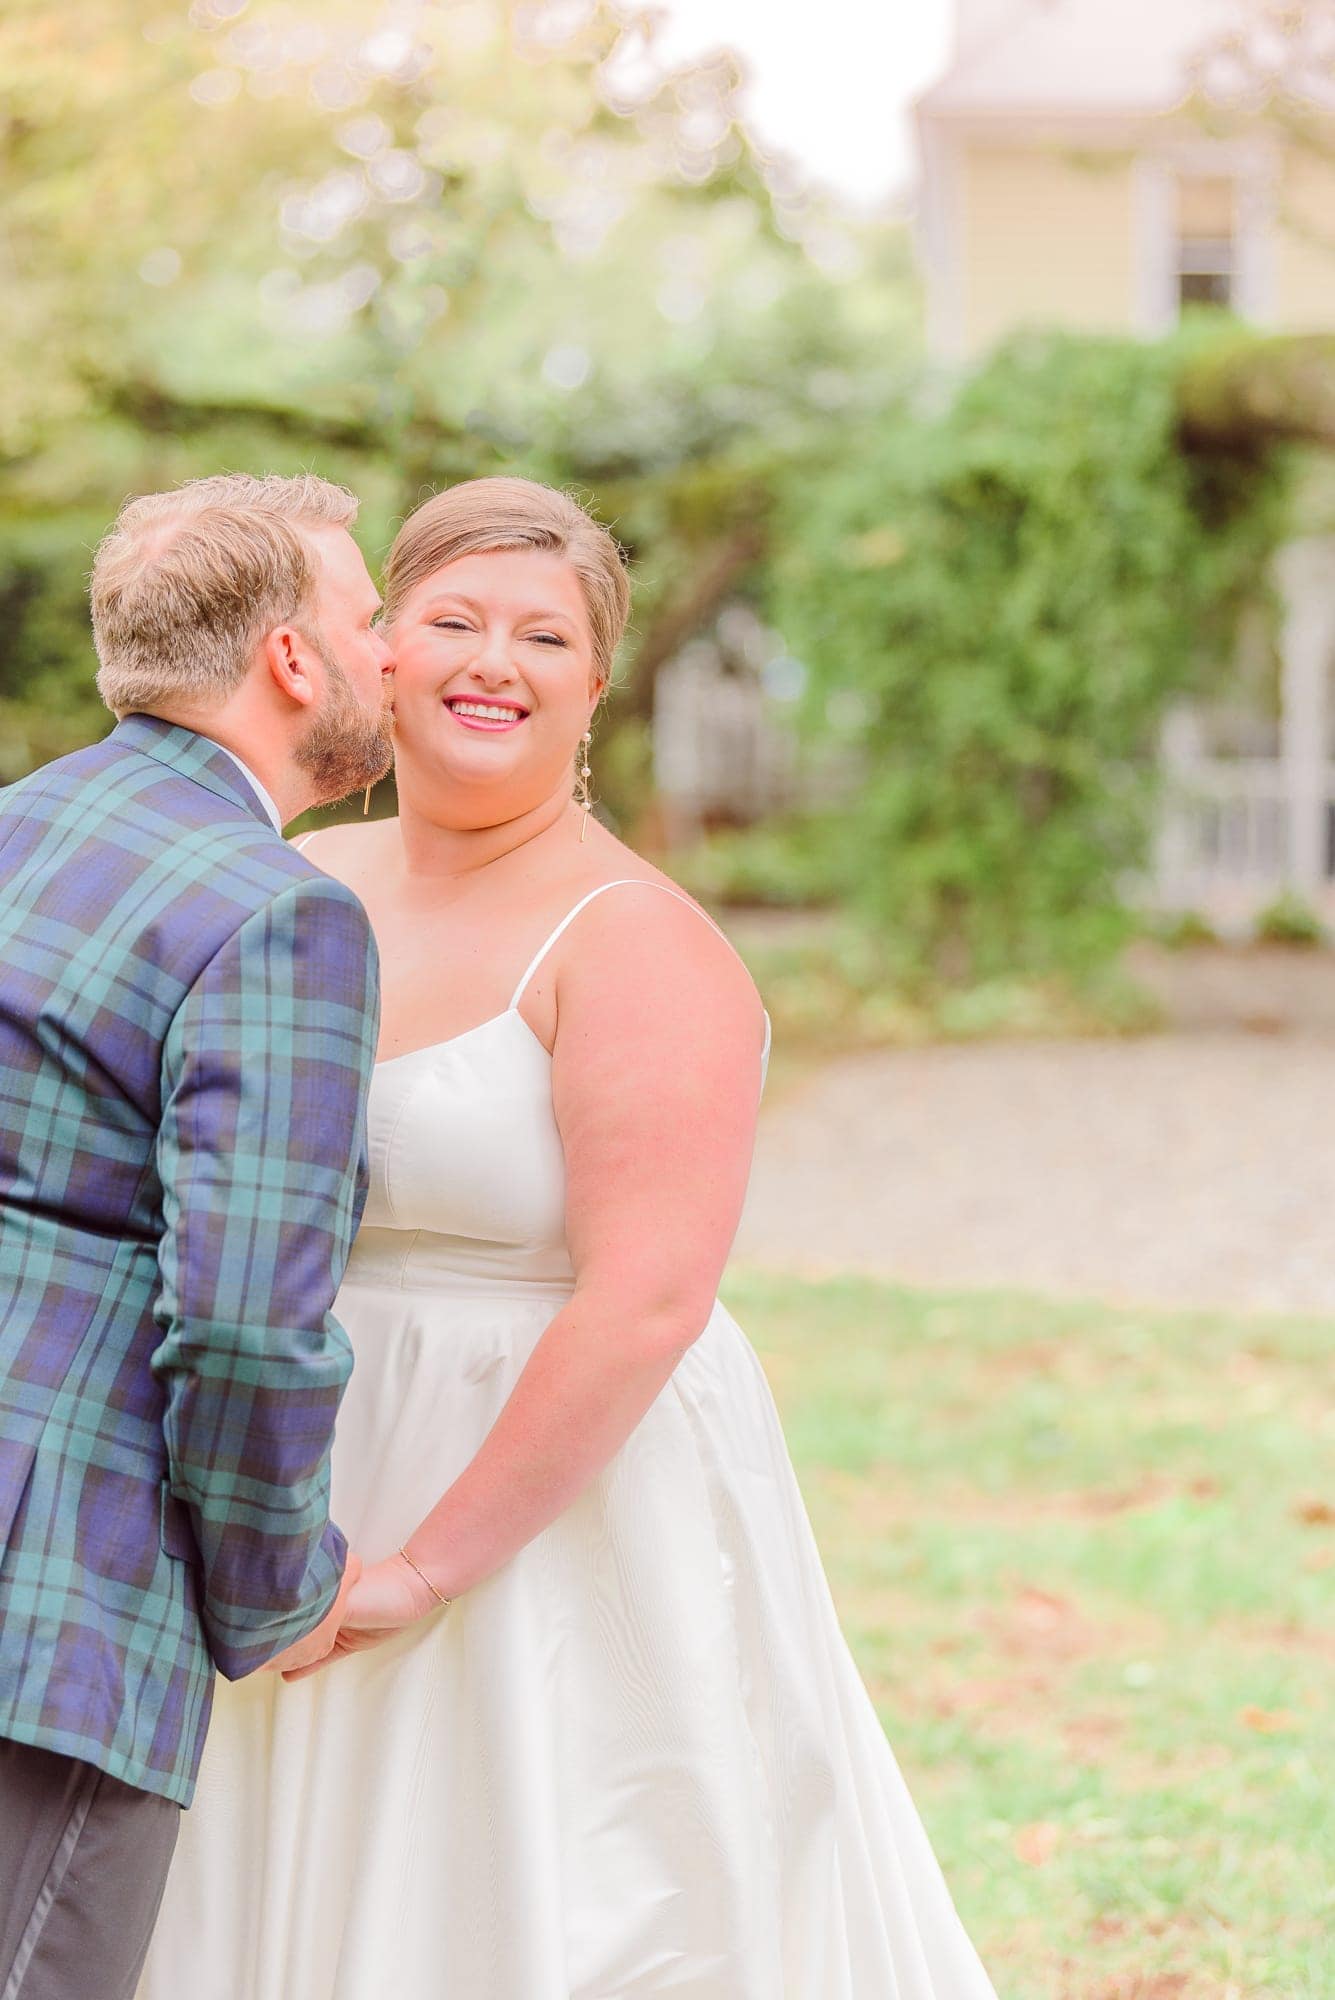 The groom kisses his bride on the cheek as she beams into the camera during their first look at the Whitehead Manor.